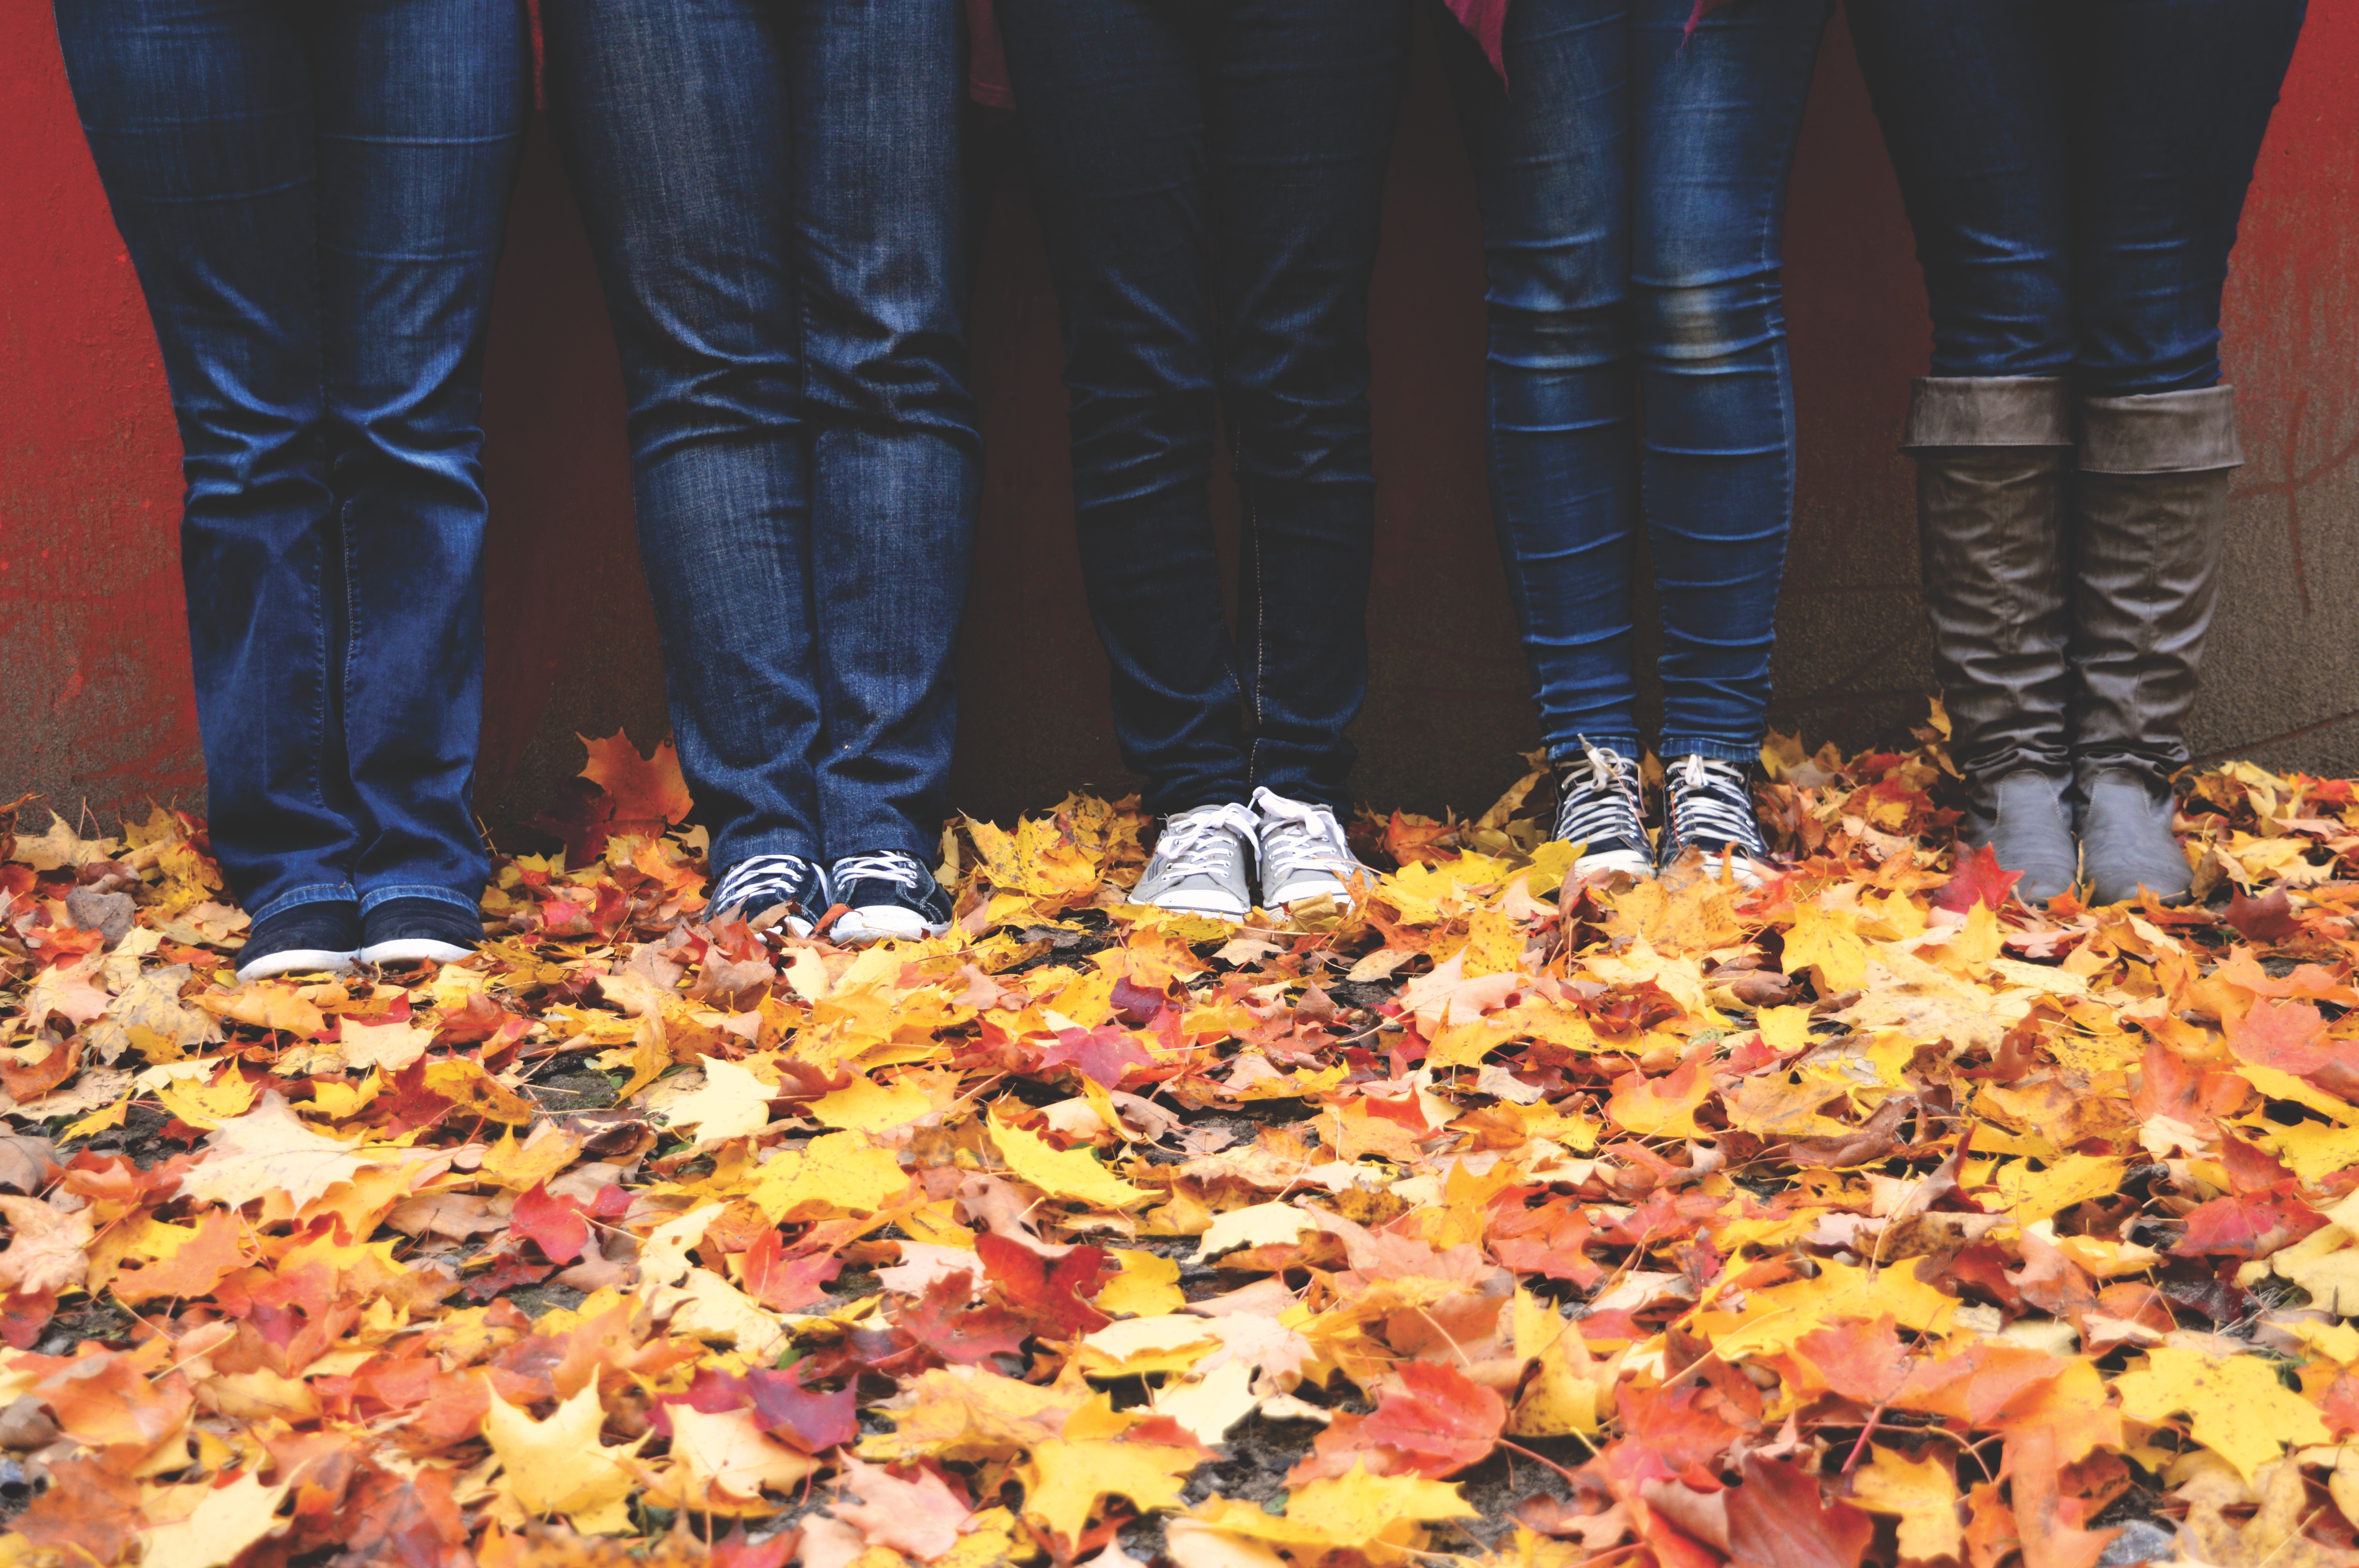 five person in blue jeans standing on dried leaves